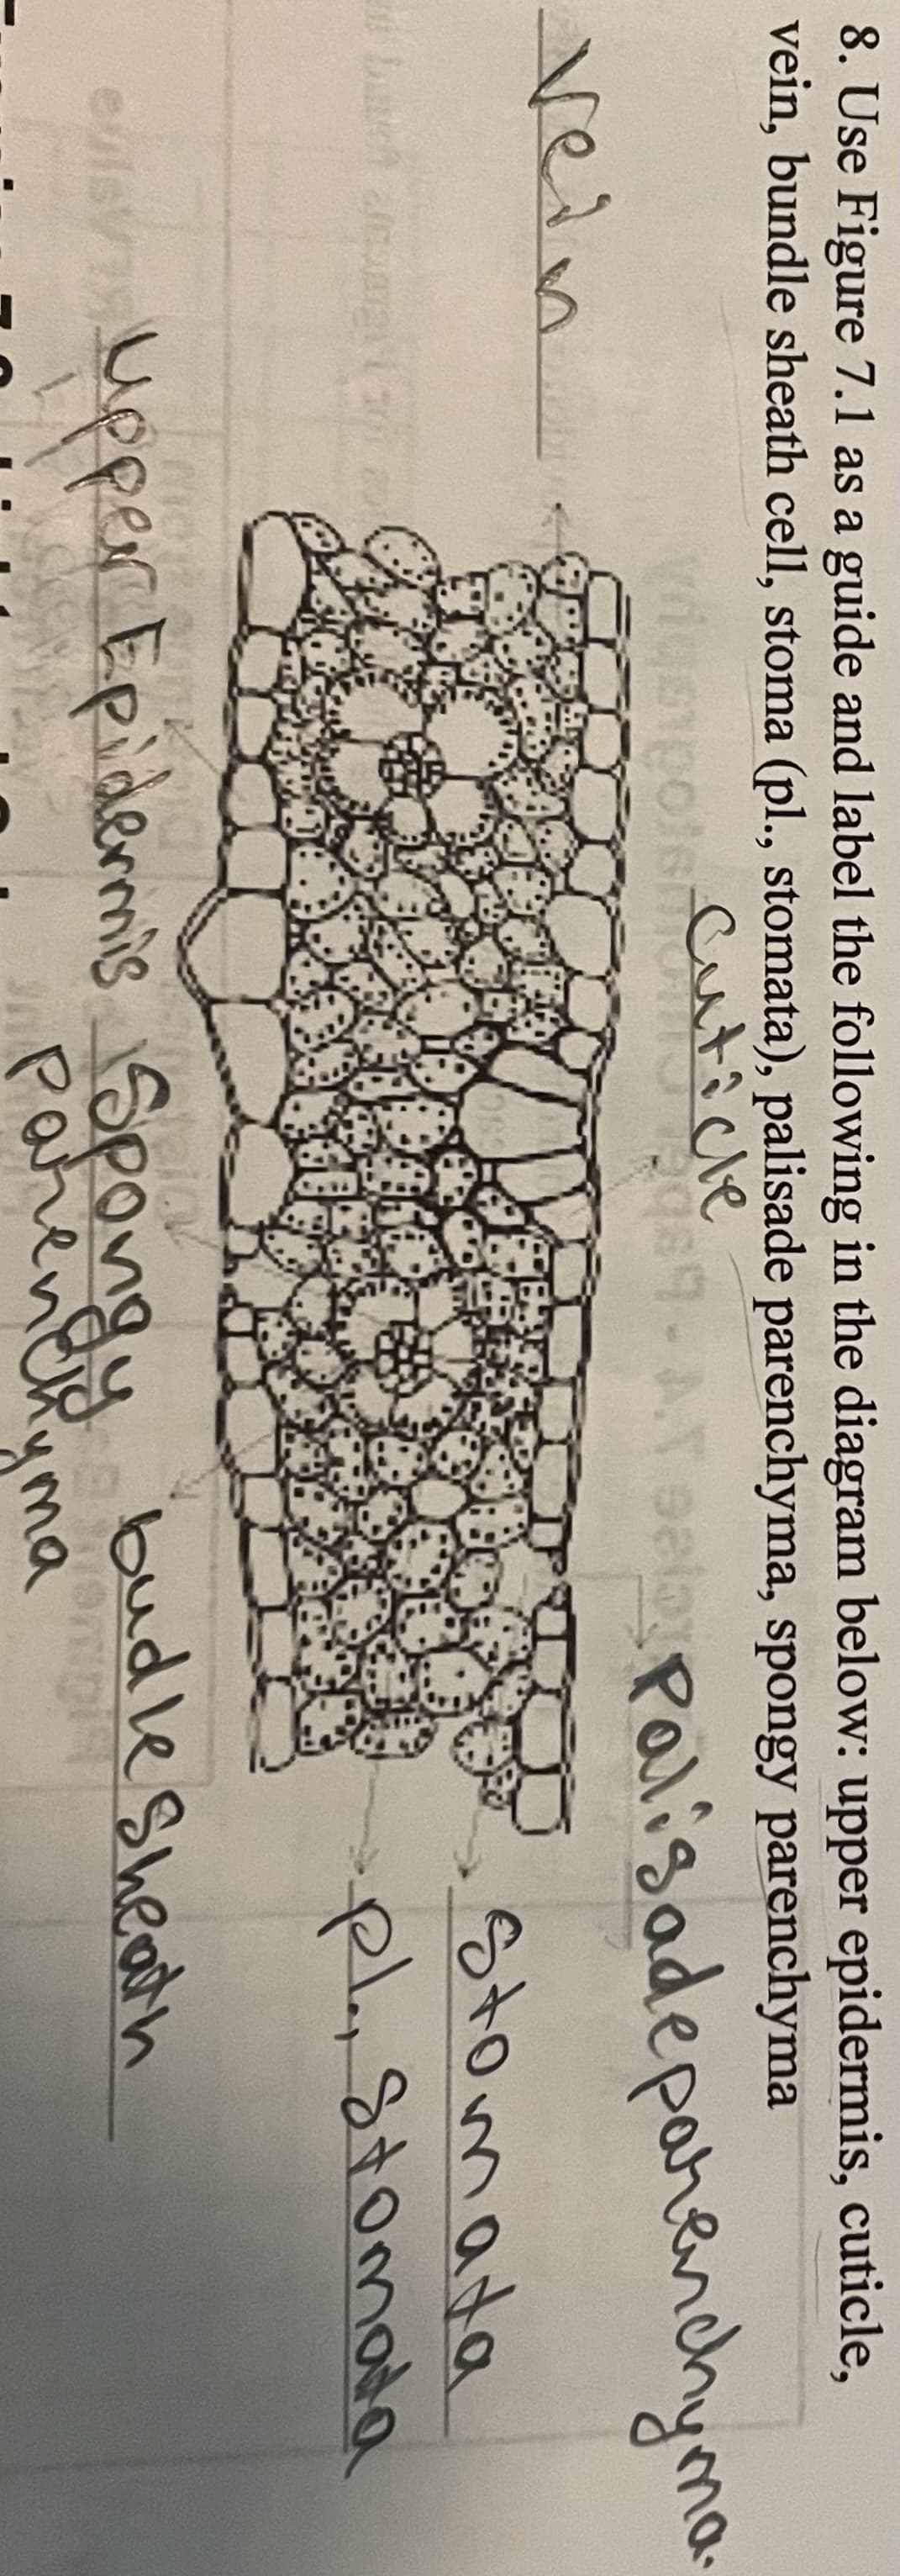 8. Use Figure 7.1 as a guide and label the following in the diagram below: upper epidermis, cuticle,
vein, bundle sheath cell, stoma (pl., stomata), palisade parenchyma, spongy parenchyma
1510016
Tools-Cuti 9.A.T se Palisade parenchyma
घ
vein
i bart alum21
stomata
pl., Stomata
olay upper Epidermis Spongy budle Sheath
ута